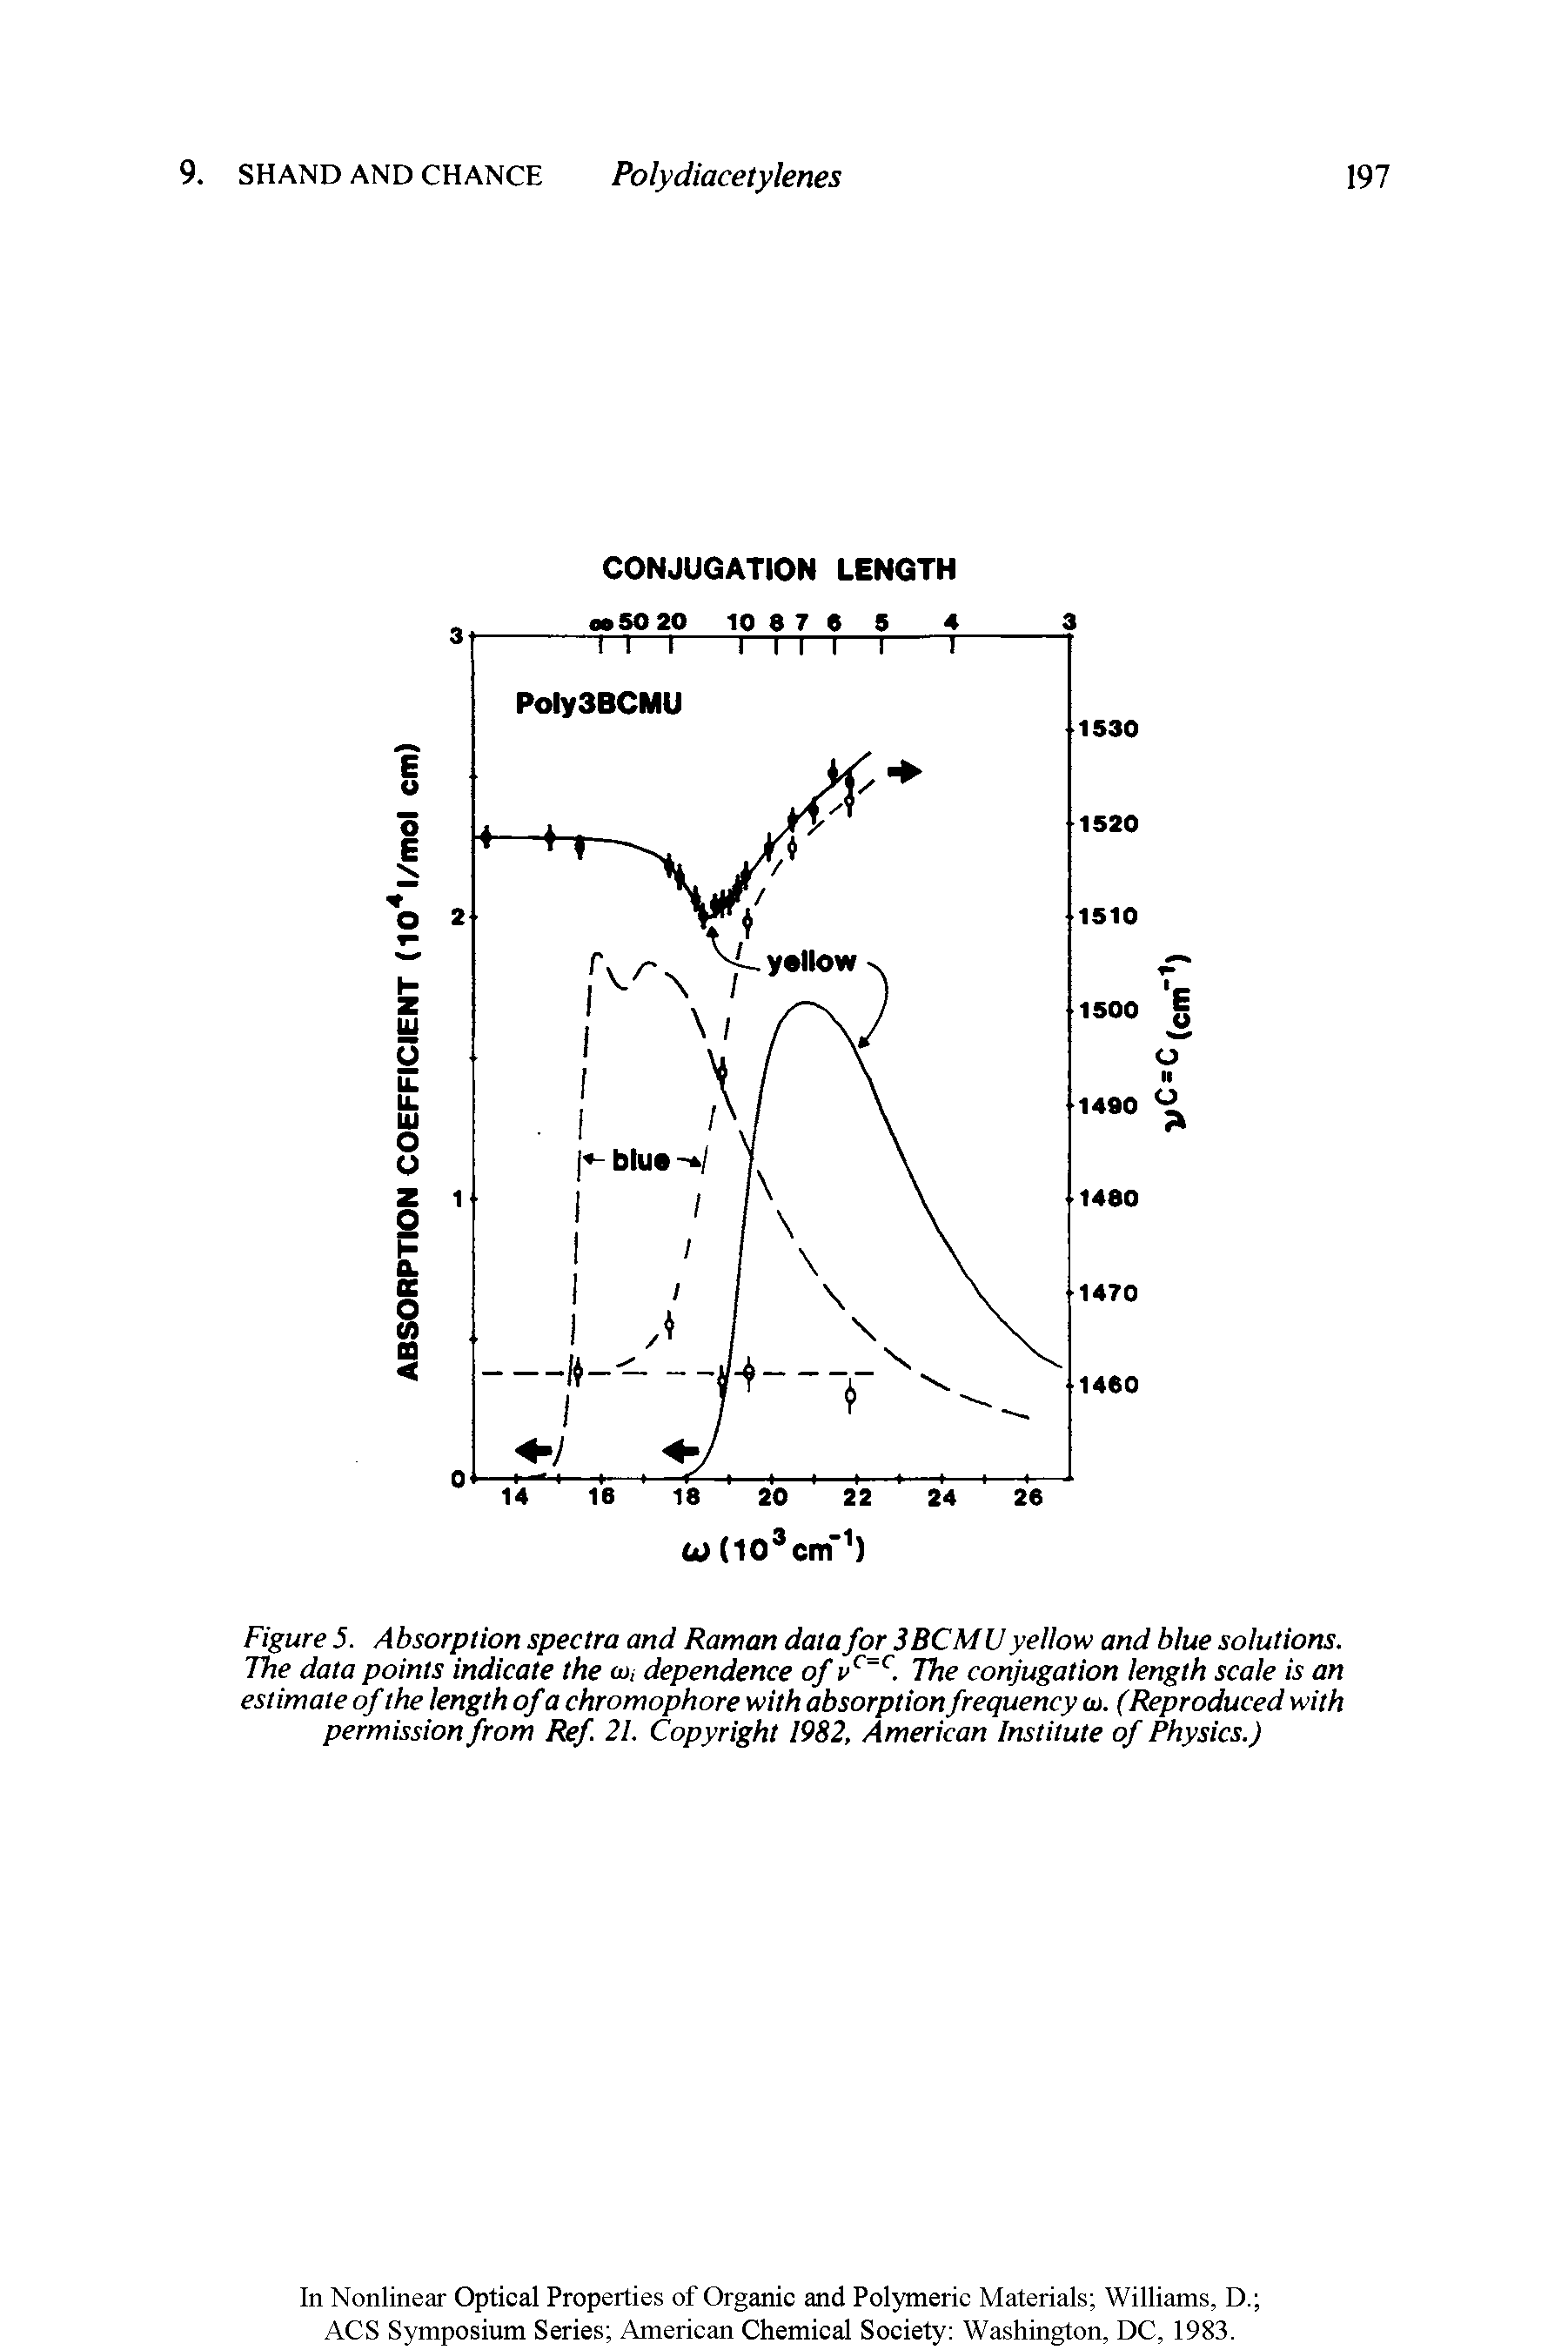 Figure 5. Absorption spectra and Raman data for 3 BCMU yellow and blue solutions. The data points indicate the co, dependence of vc=c. The conjugation length scale is an estimate of the length of a chromophore with absorption frequency co. (Reproduced with permission from Ref 21. Copyright 1982, American Institute of Physics.)...